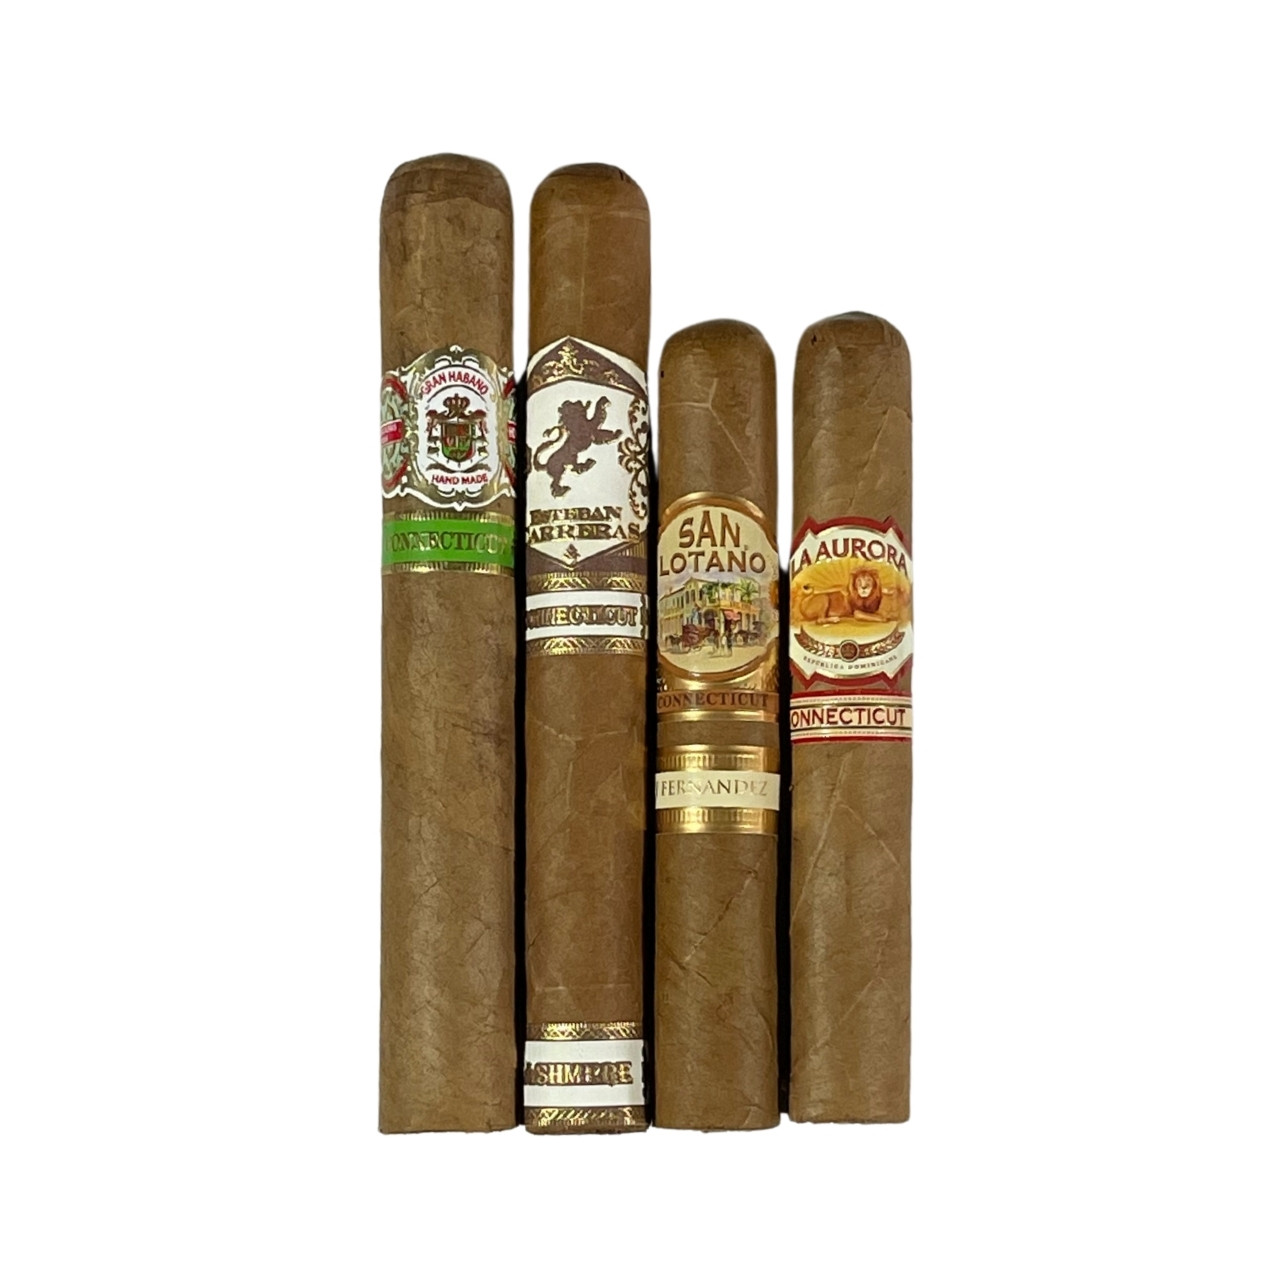 THE best selling sampler on my site!  Awesome Connecticut shade cigars for under $21.00 with FREE shipping